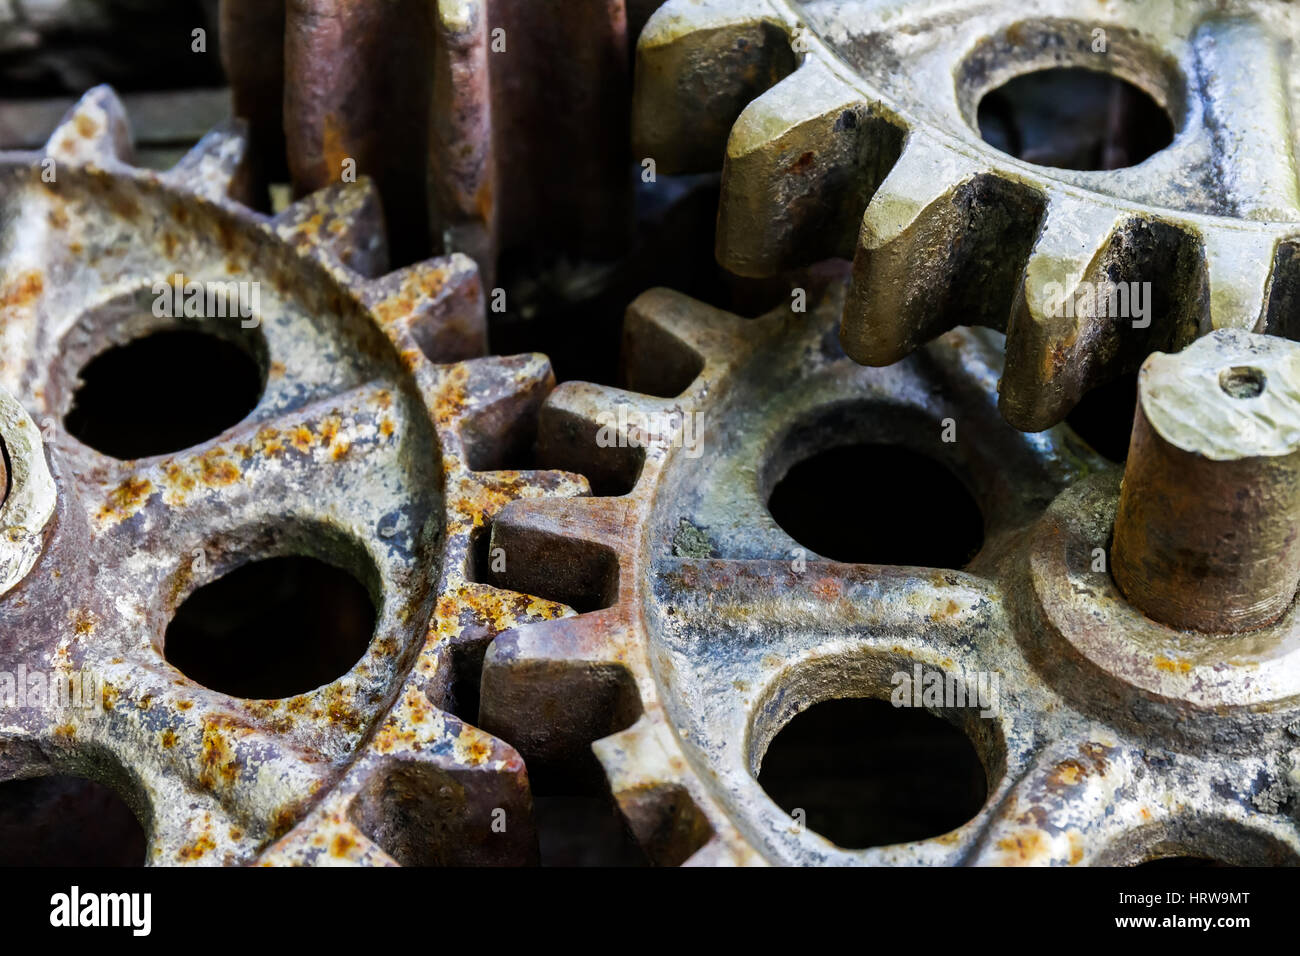 old rusty gears, machinery parts, closeup view Stock Photo